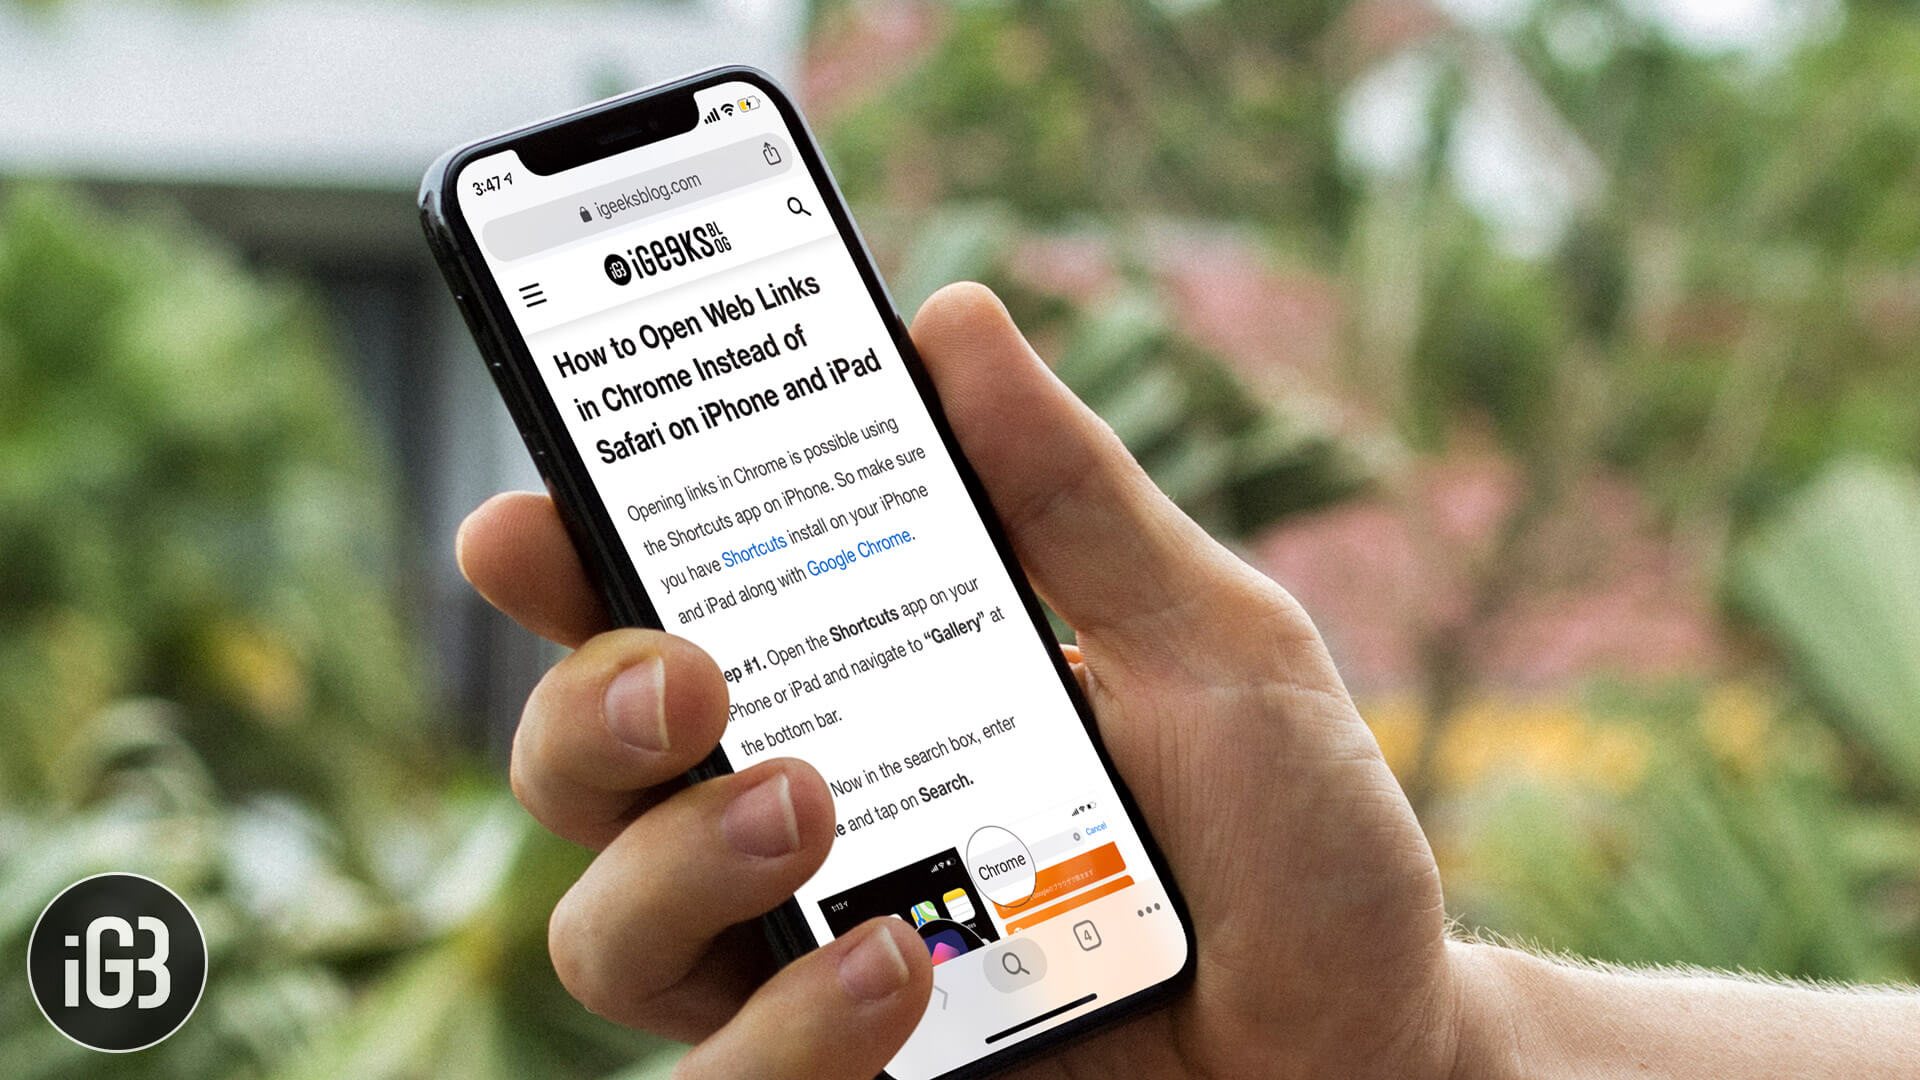 How to Open Links in Chrome on iPhone and iPad Using Shortcuts App